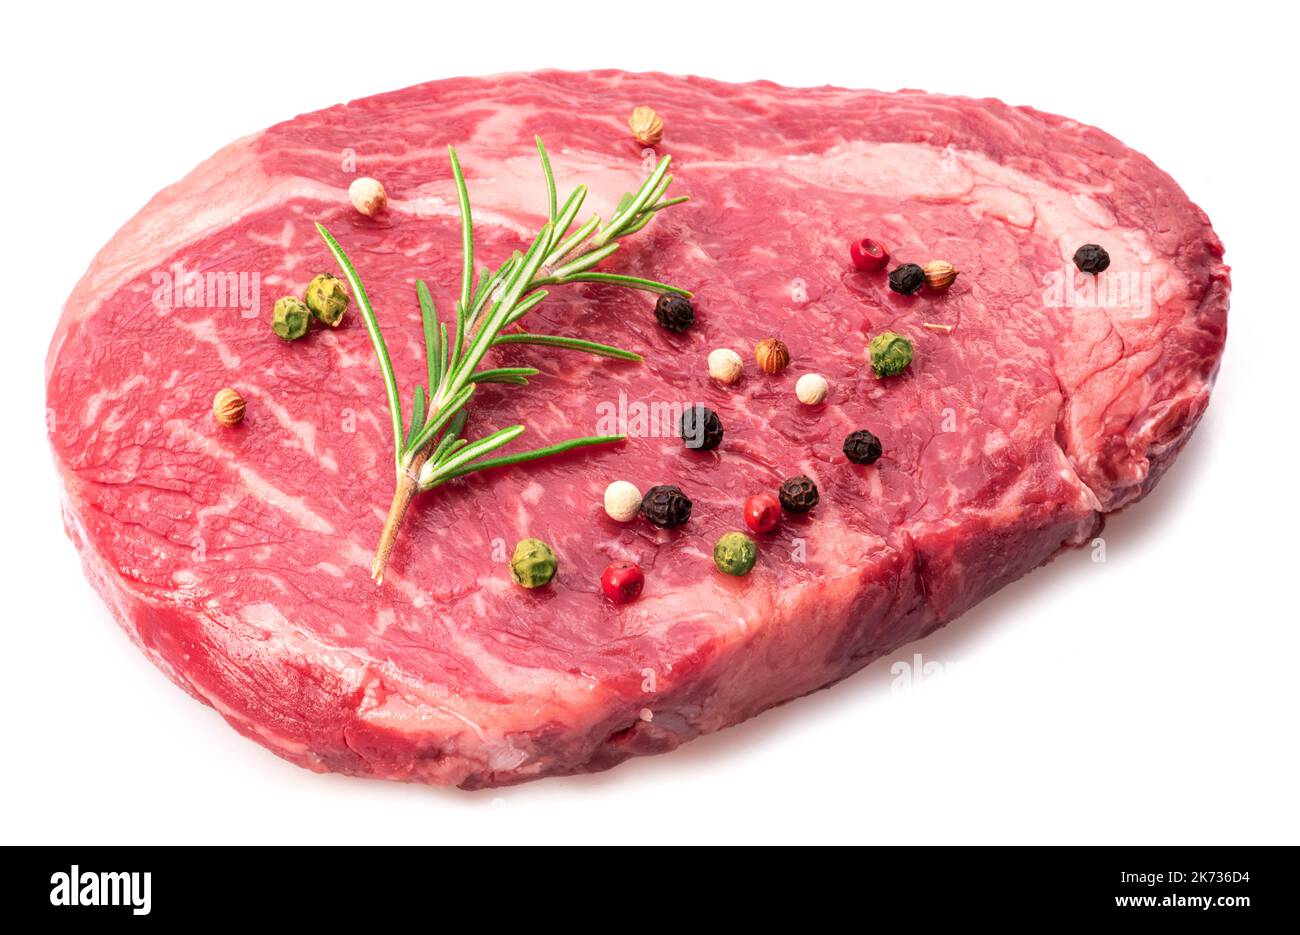 Ribeye steak with peppercorn and rosemary isolated on white background. Top view. Stock Photo